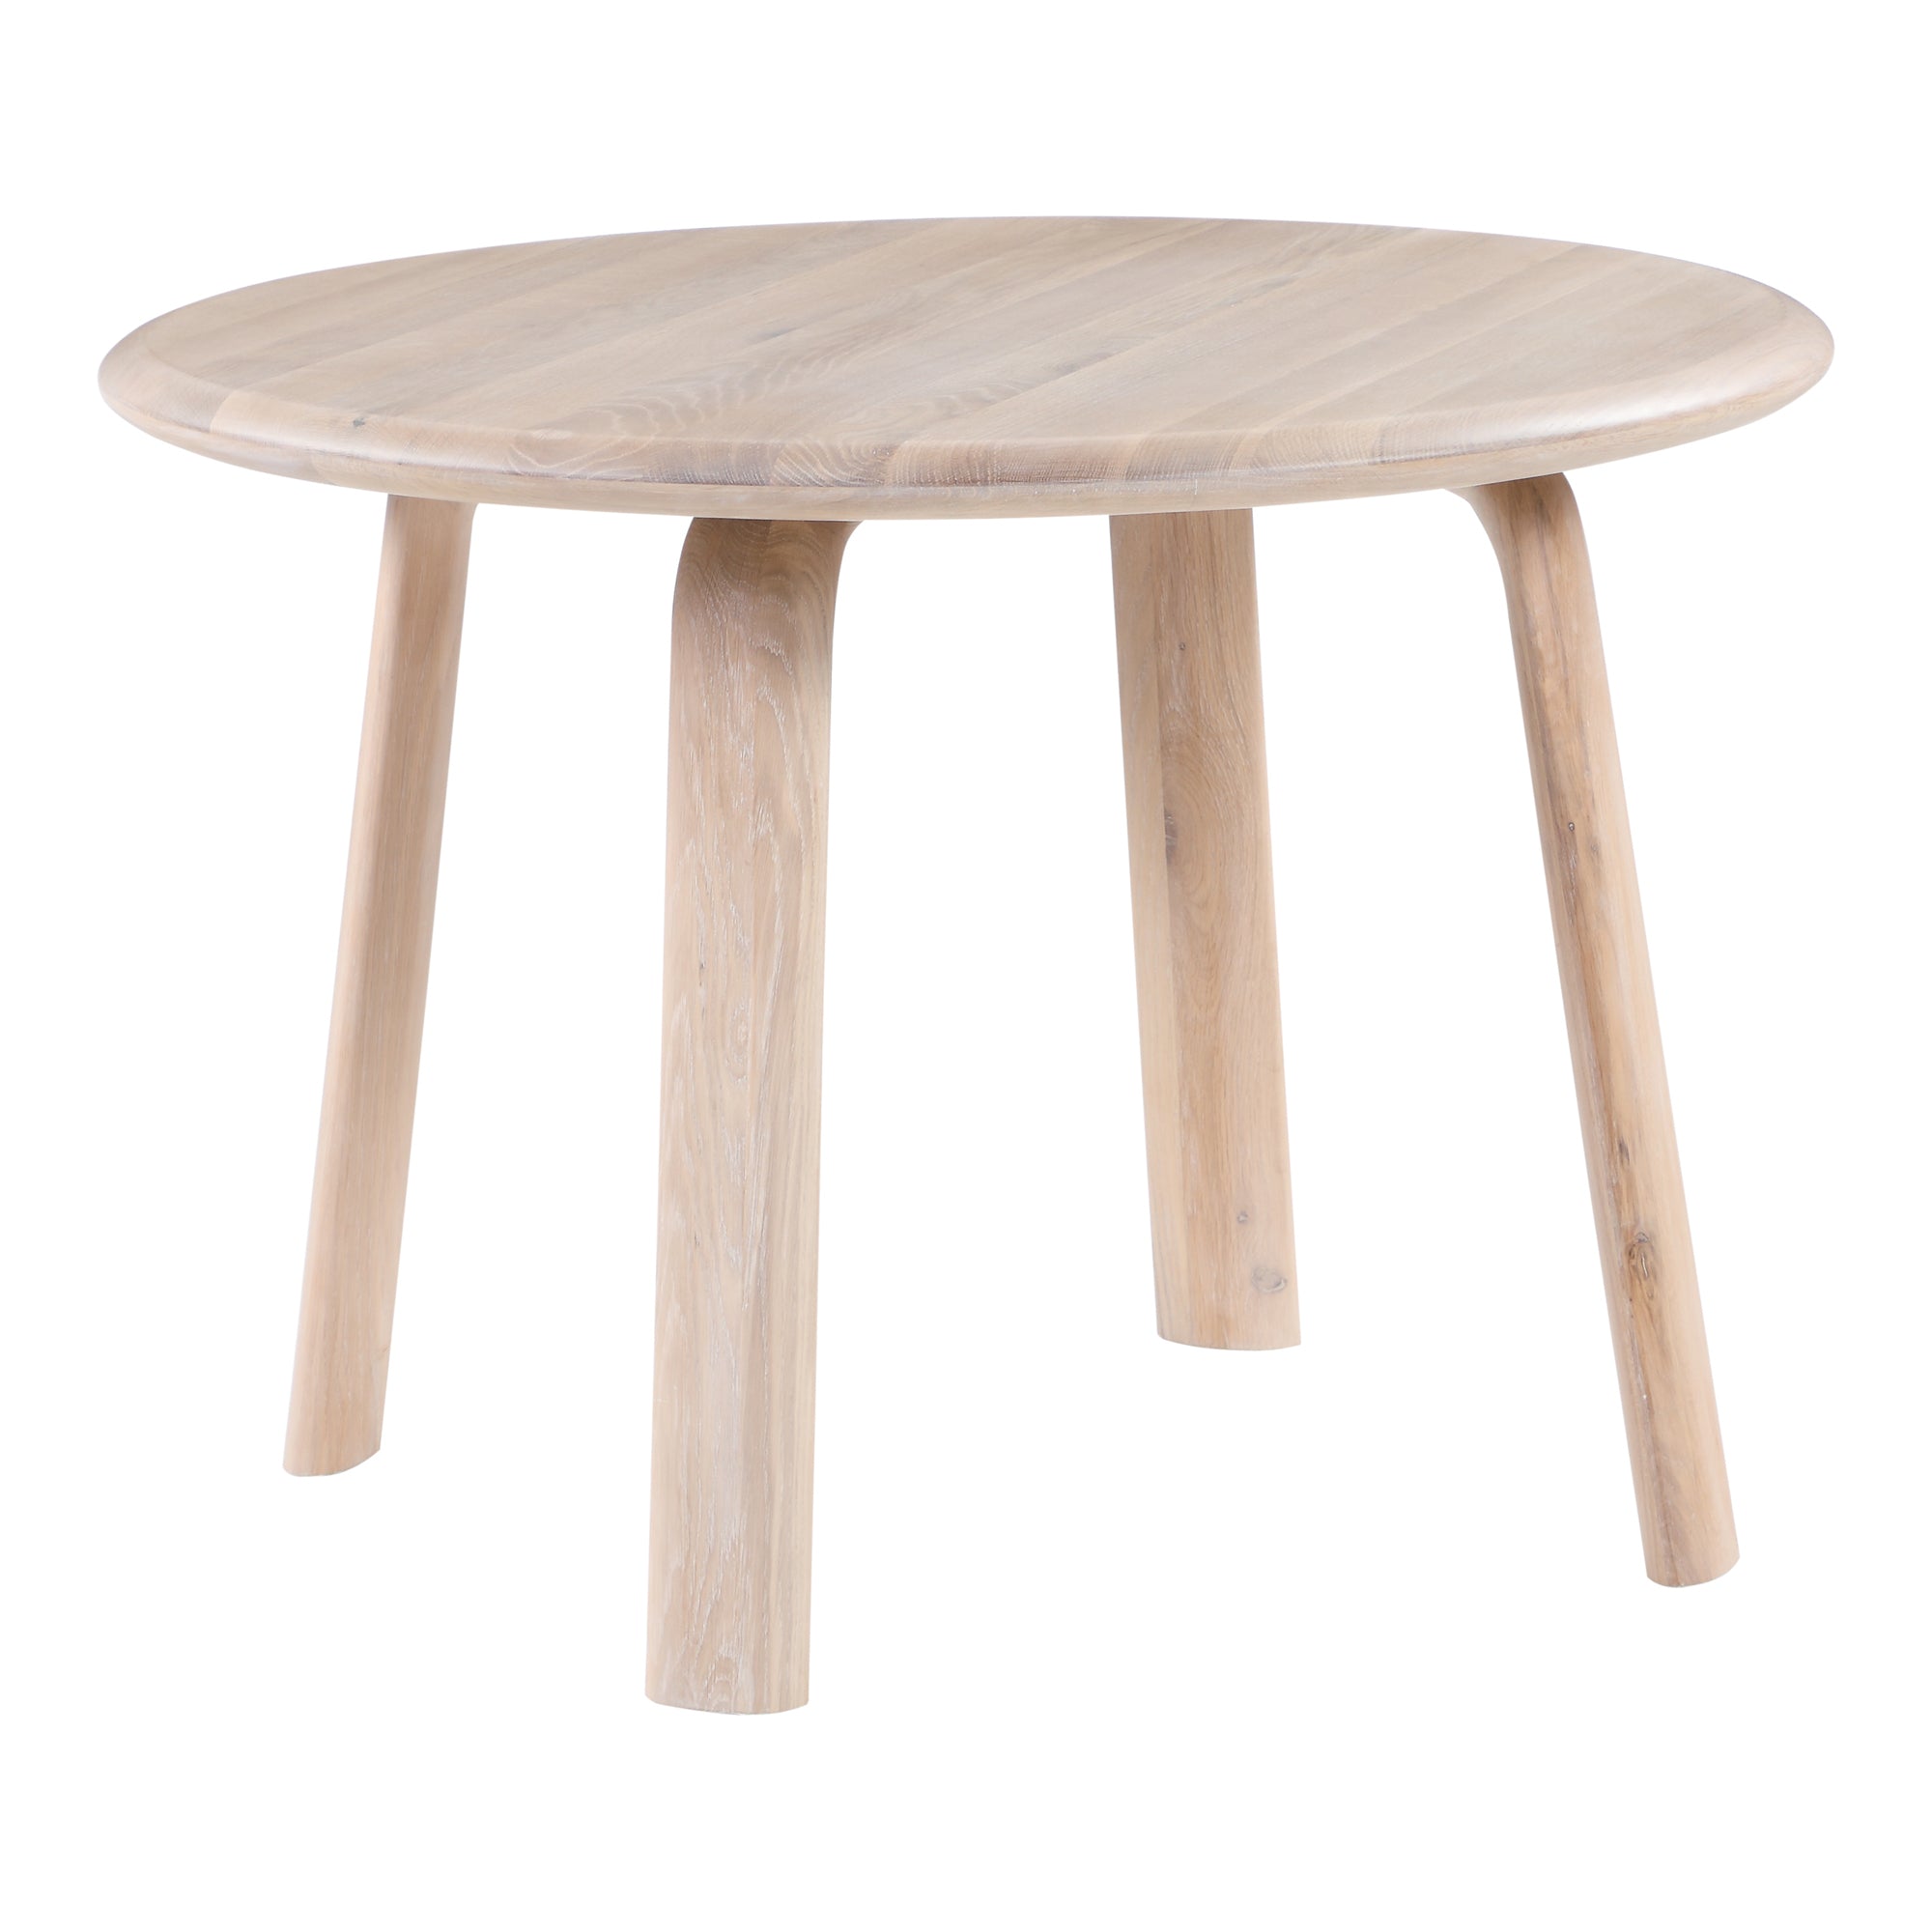 MOES-Malibu Round Oak Dining Table-Dining Tables-MODTEMPO